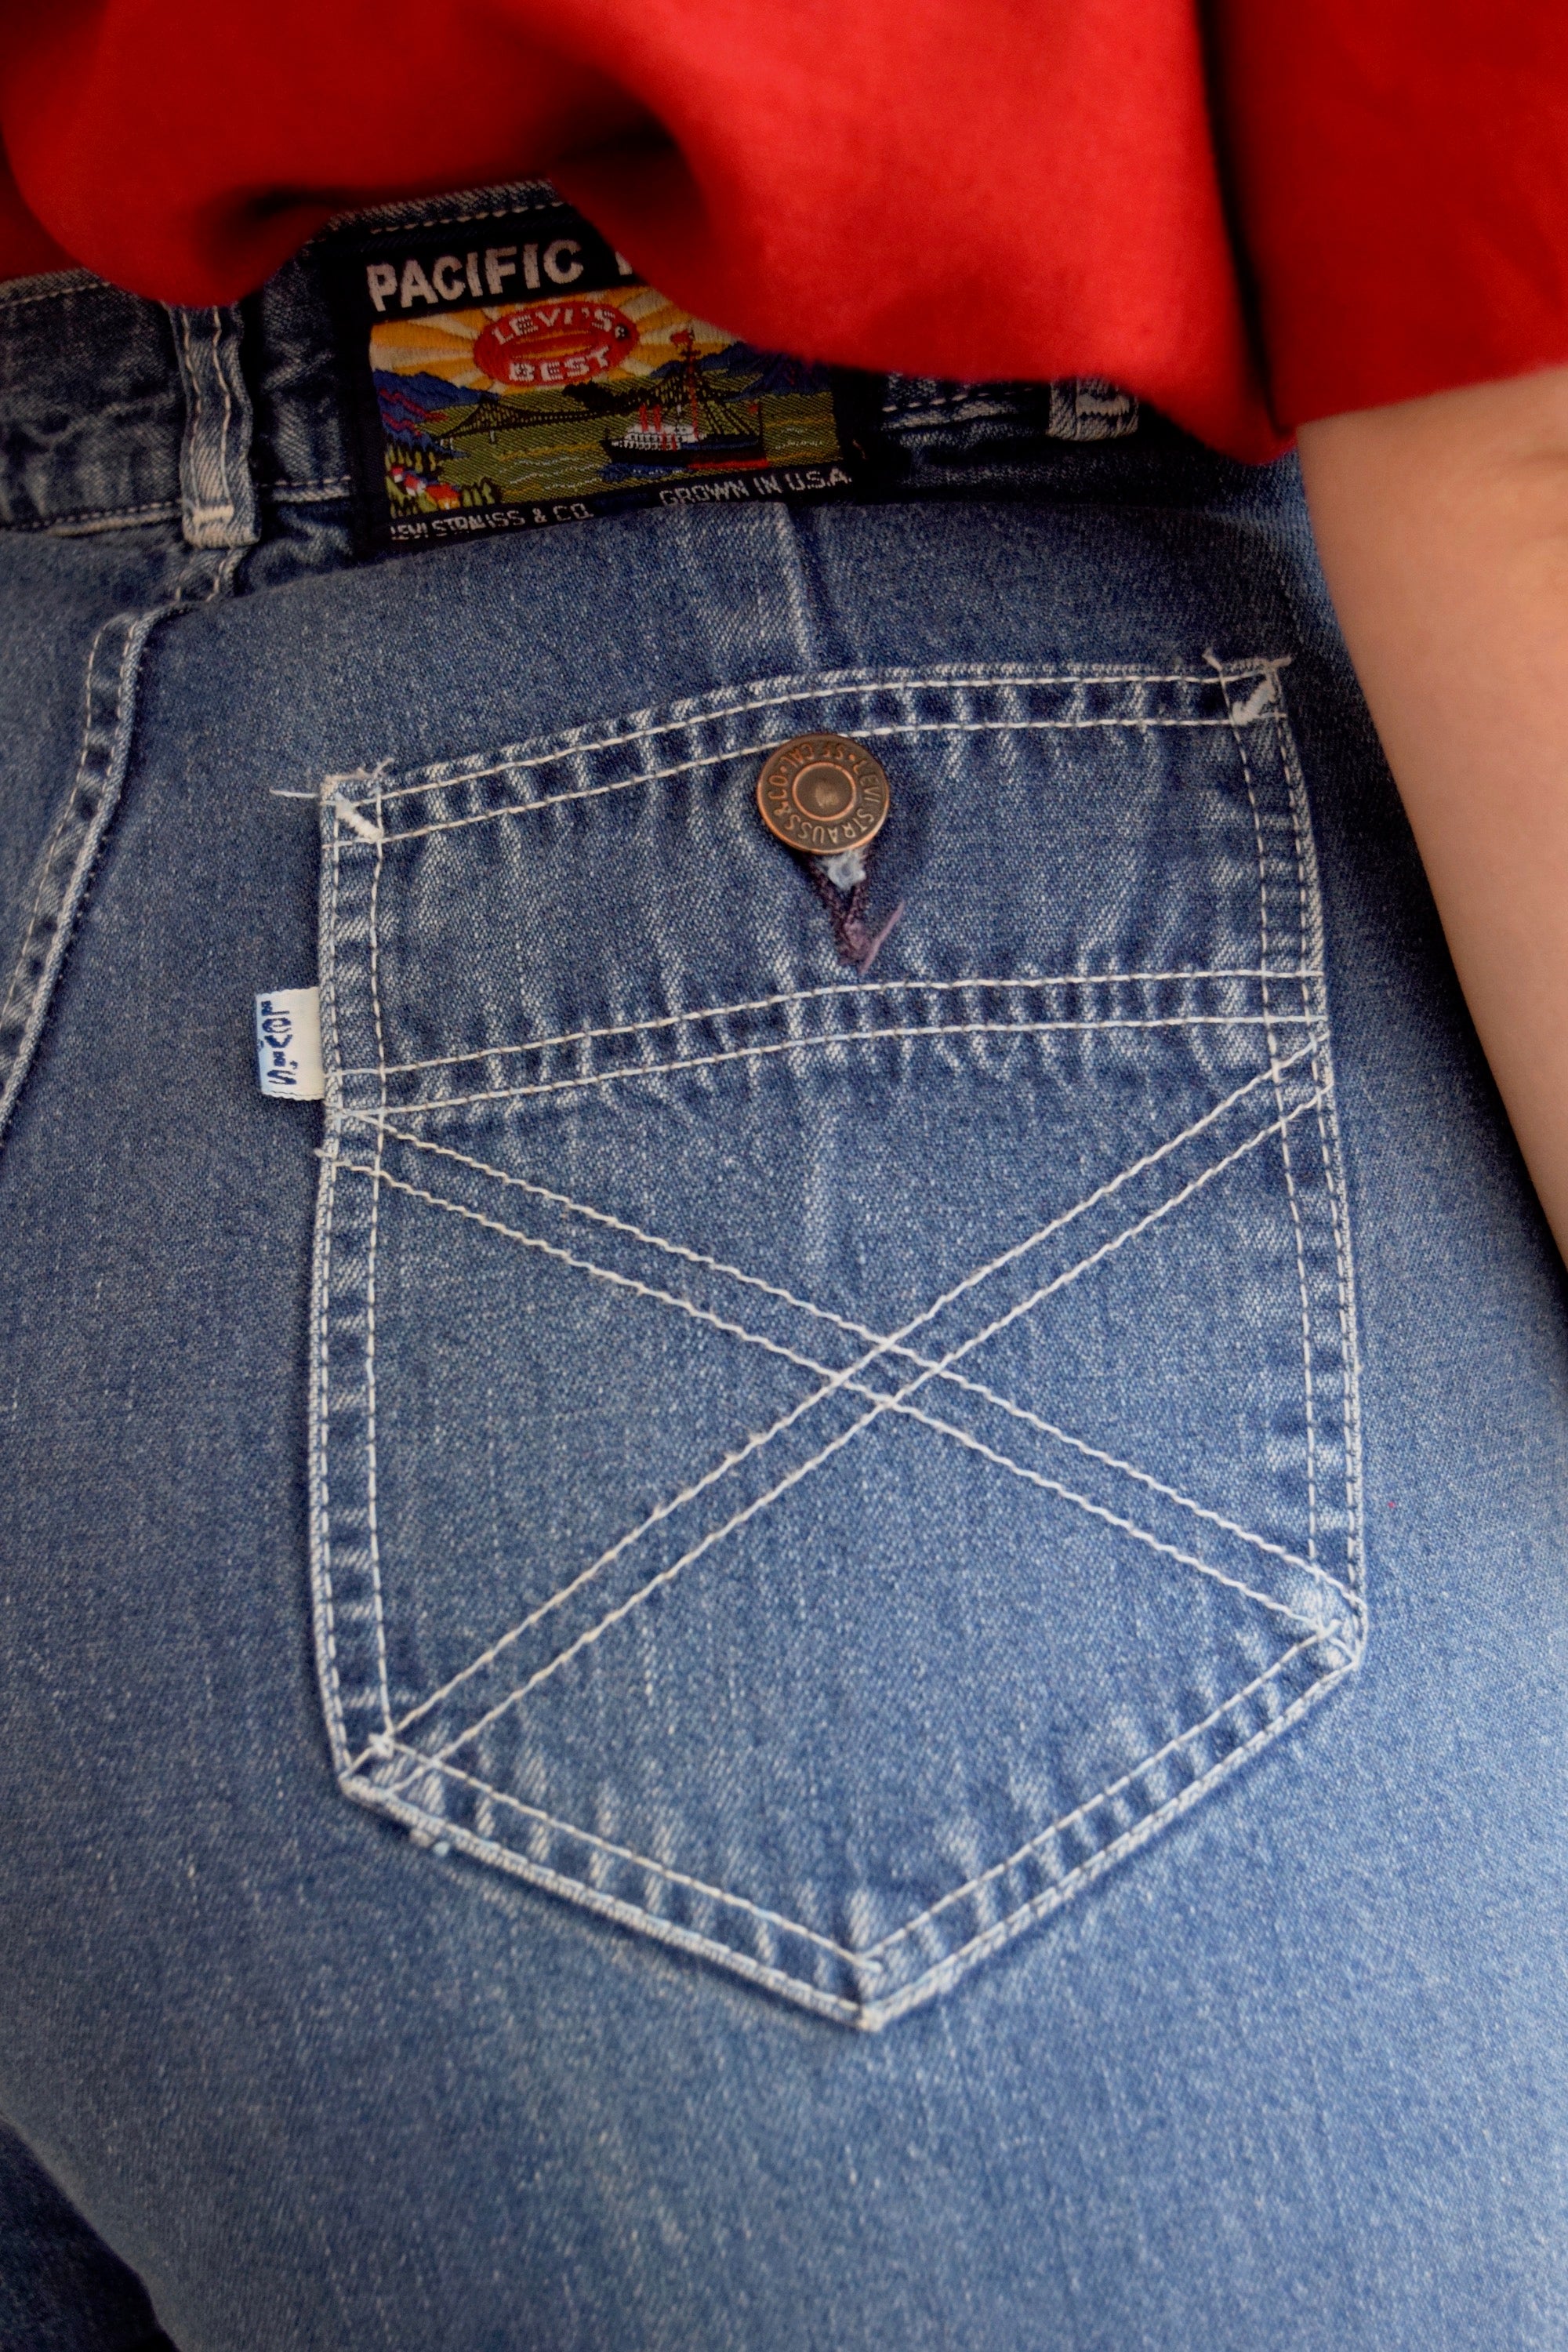 Vintage 70's Levi's Pacific Pride Bell Bottom Jeans